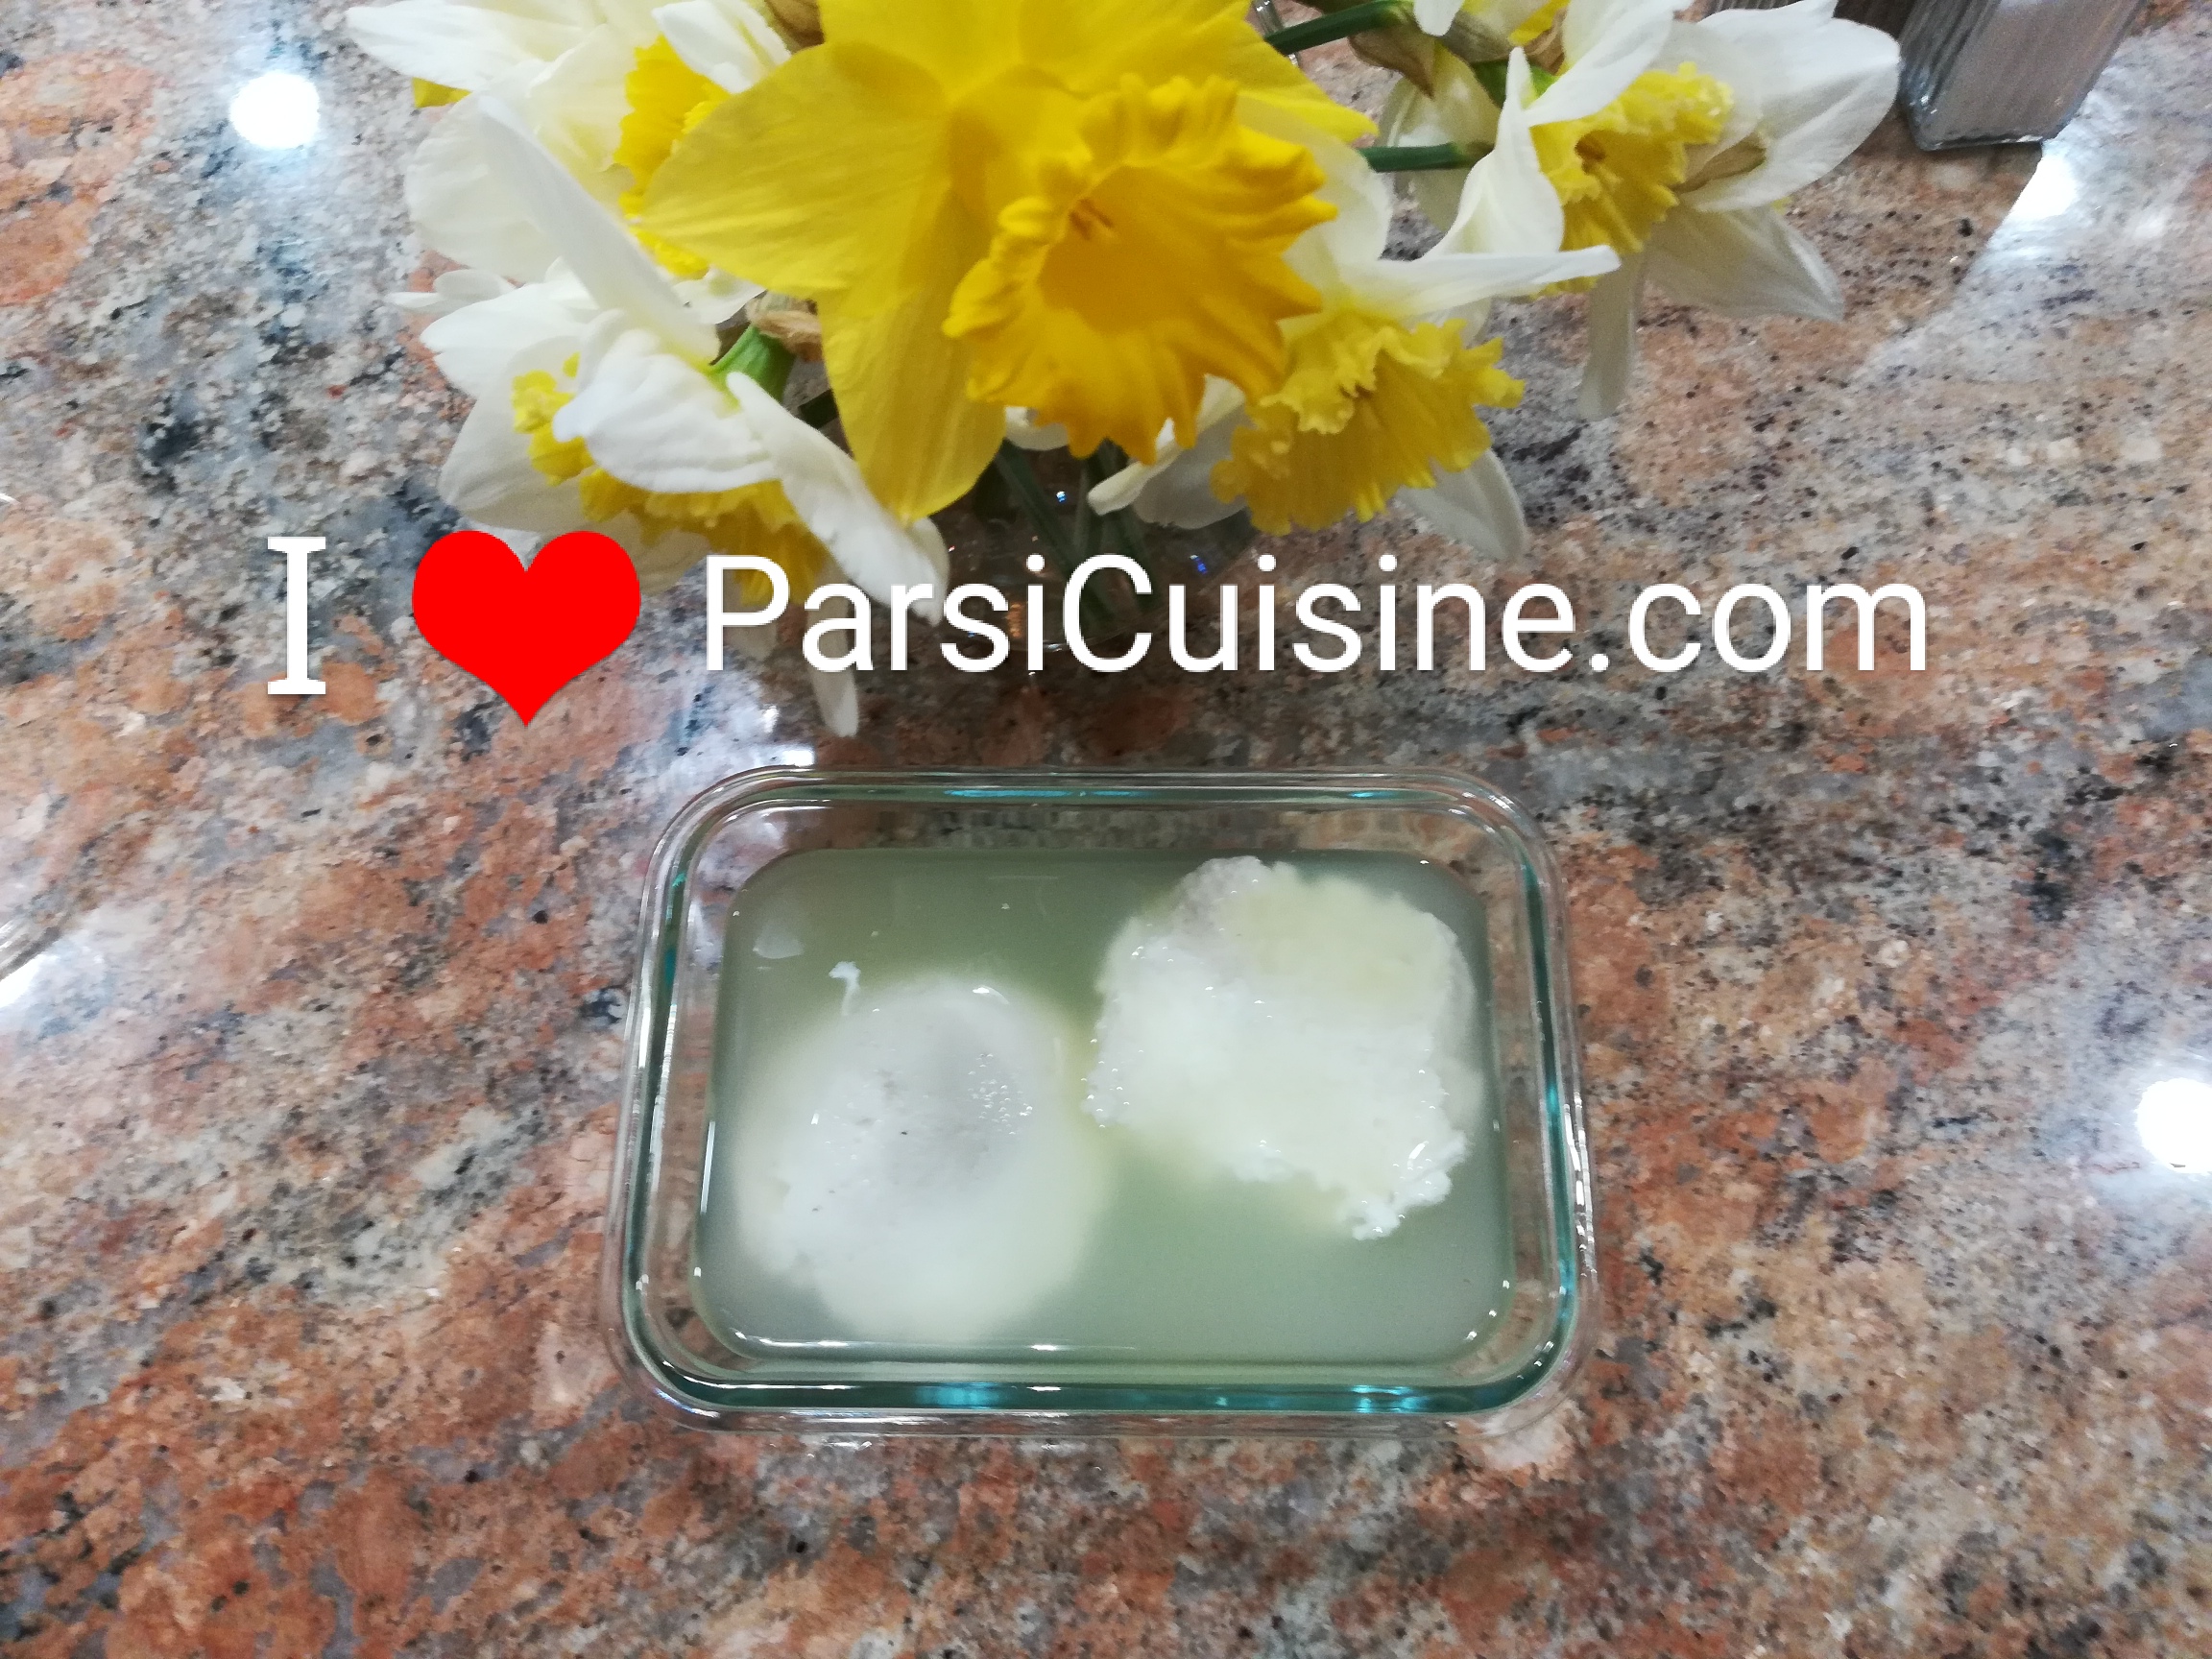 Recipe of an Indian soft cheese made at home with Rennet. Topli na Panir